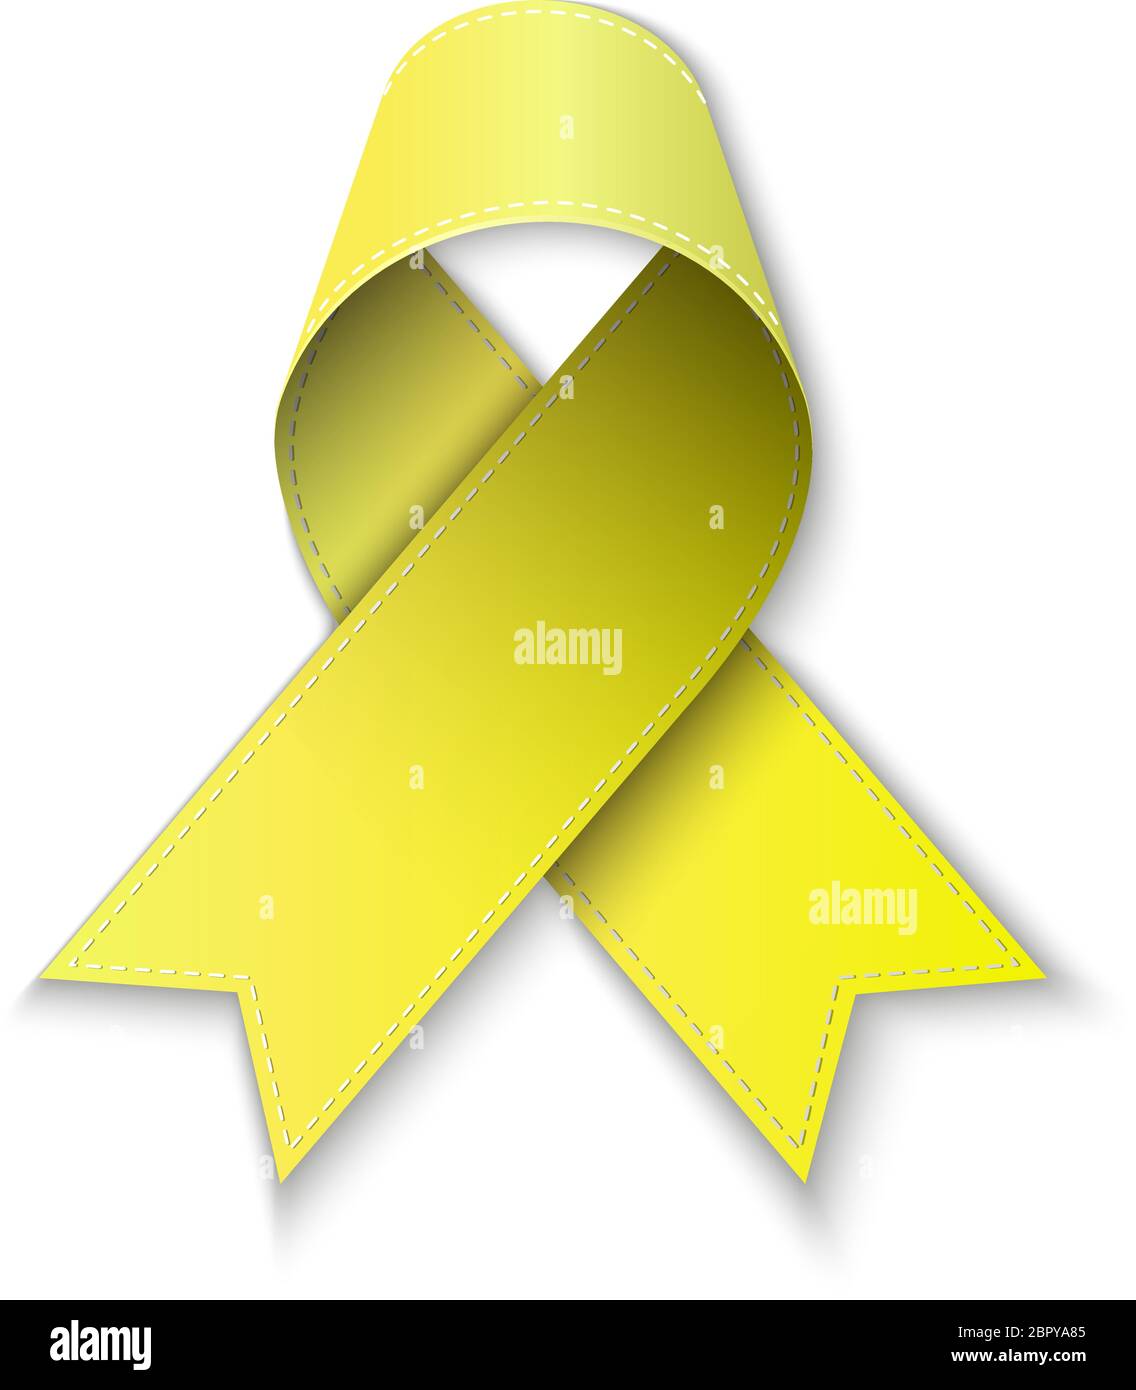 childhood cancer awareness ribbon on white backgroung Stock Vector